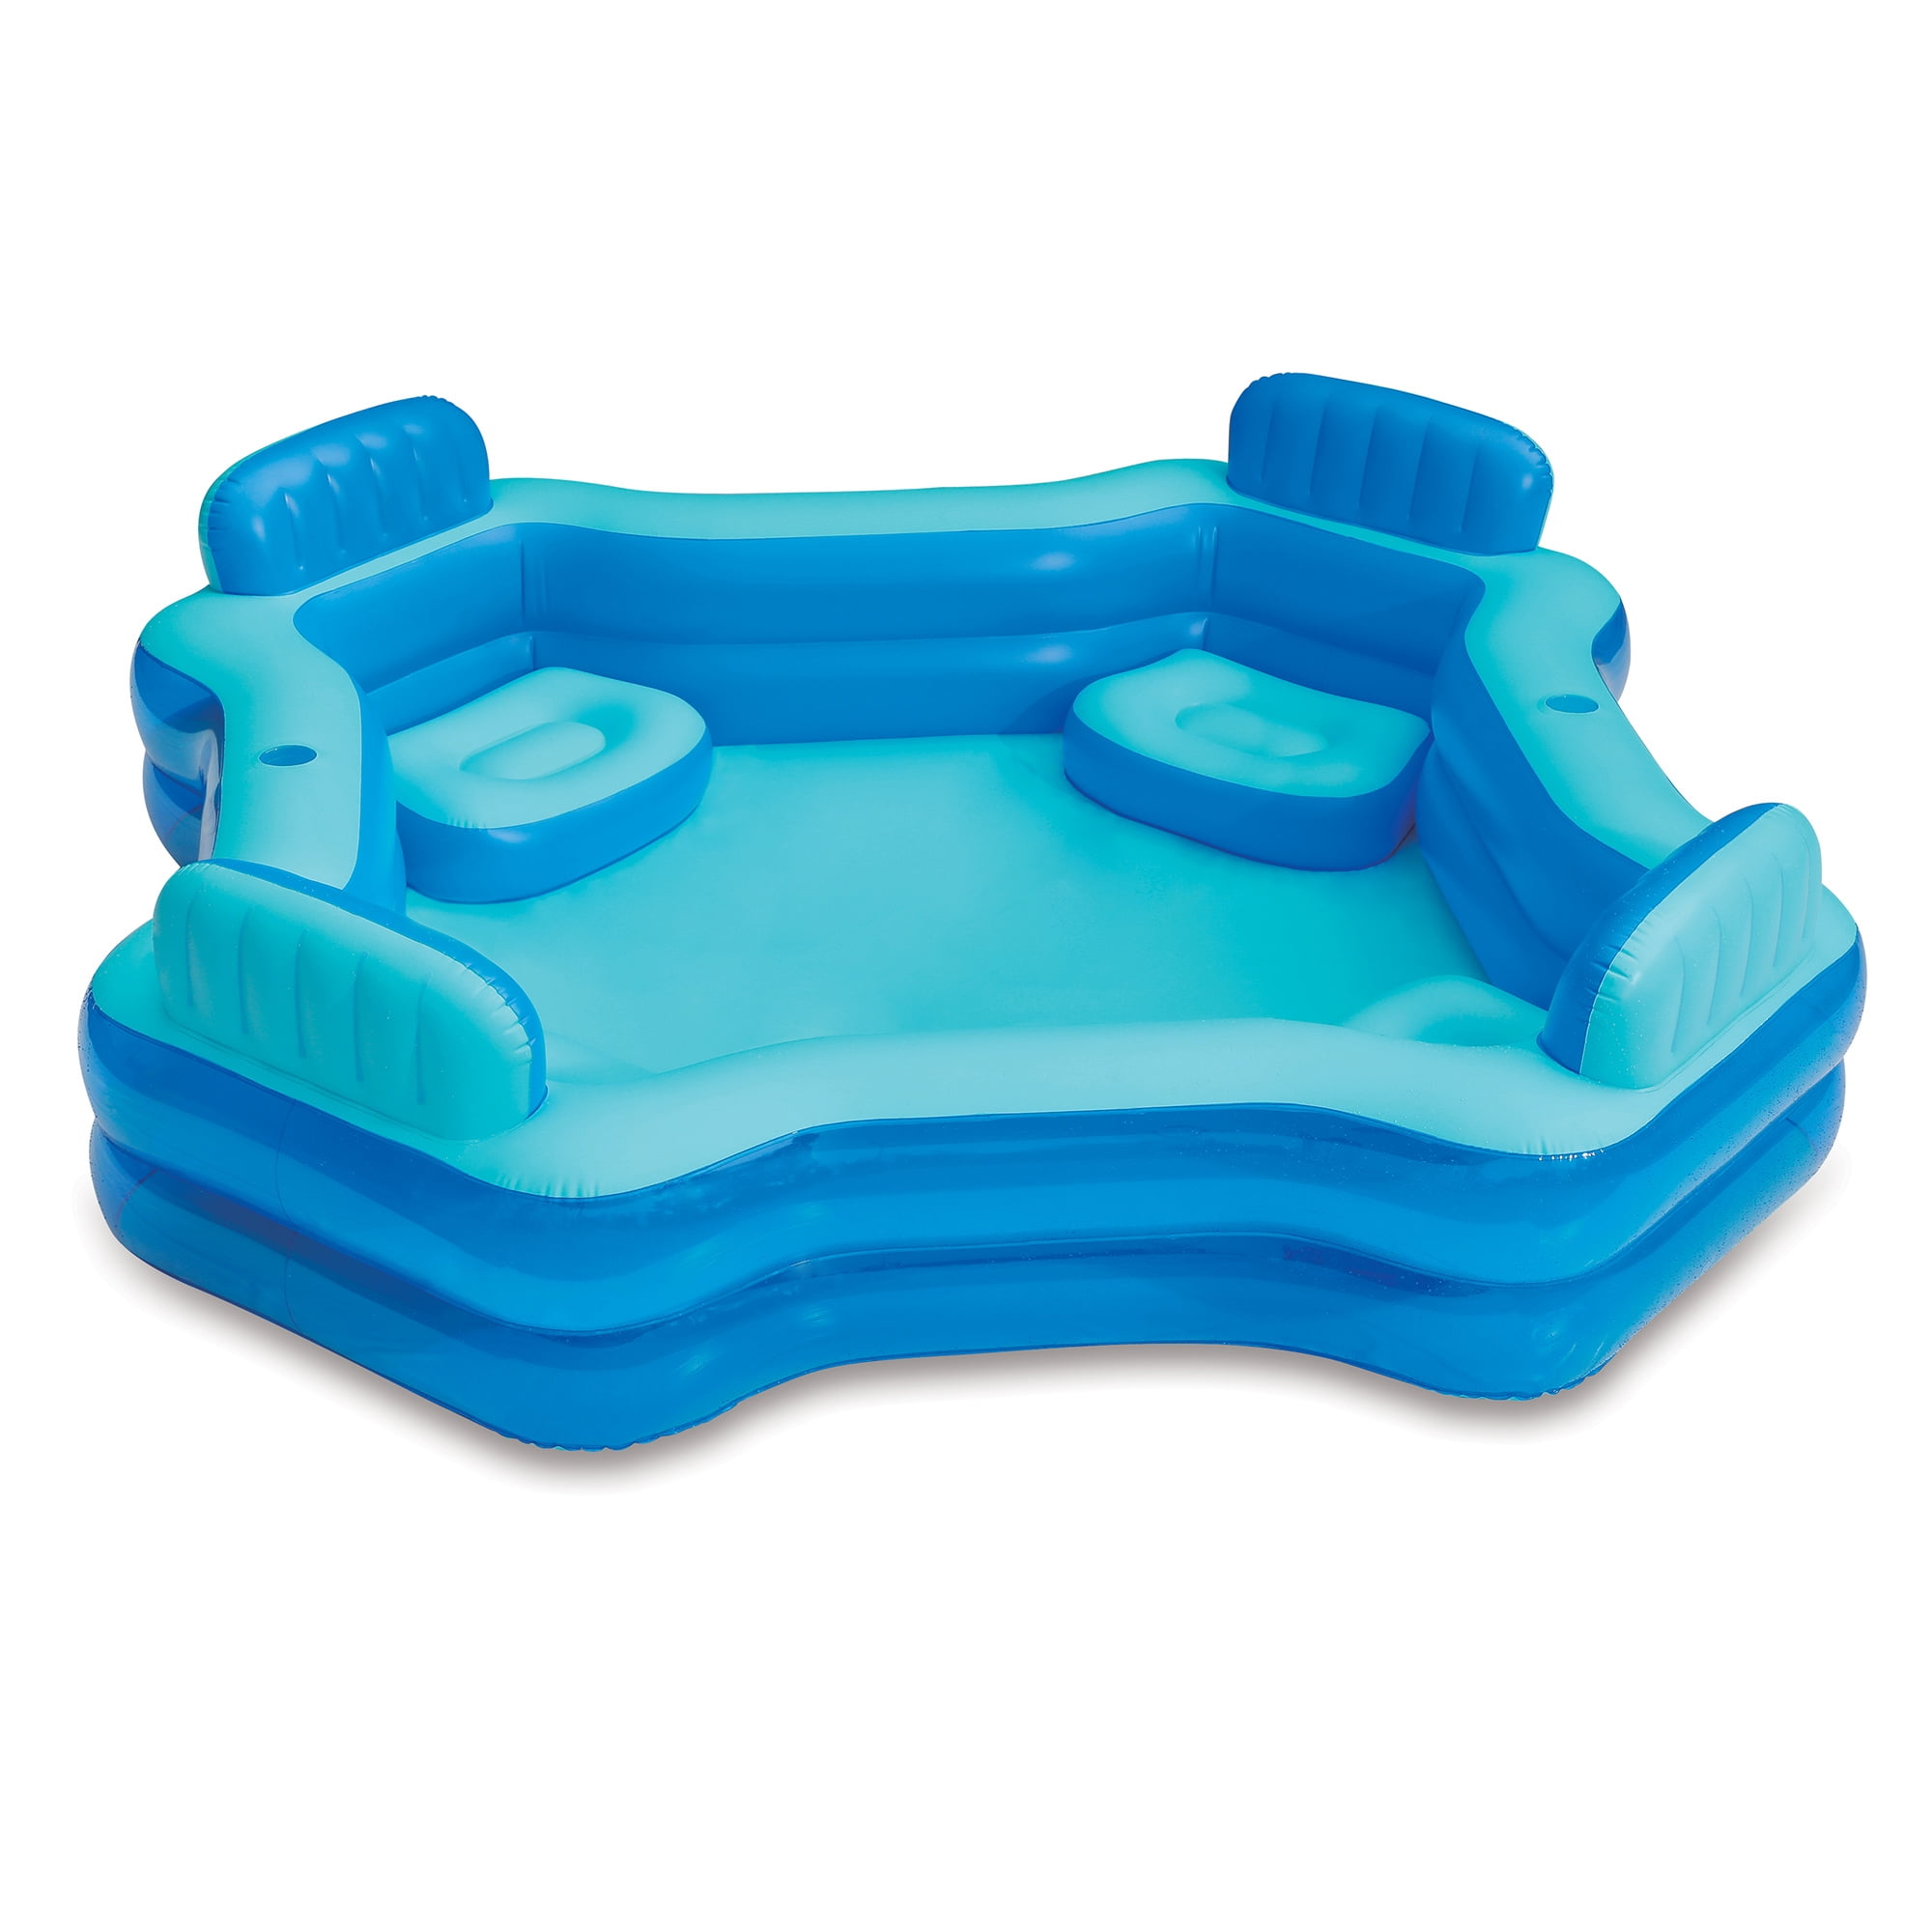 Play Day Deluxe Comfort Family Inflatable Swimming Pool Lounge Swim Center Seats